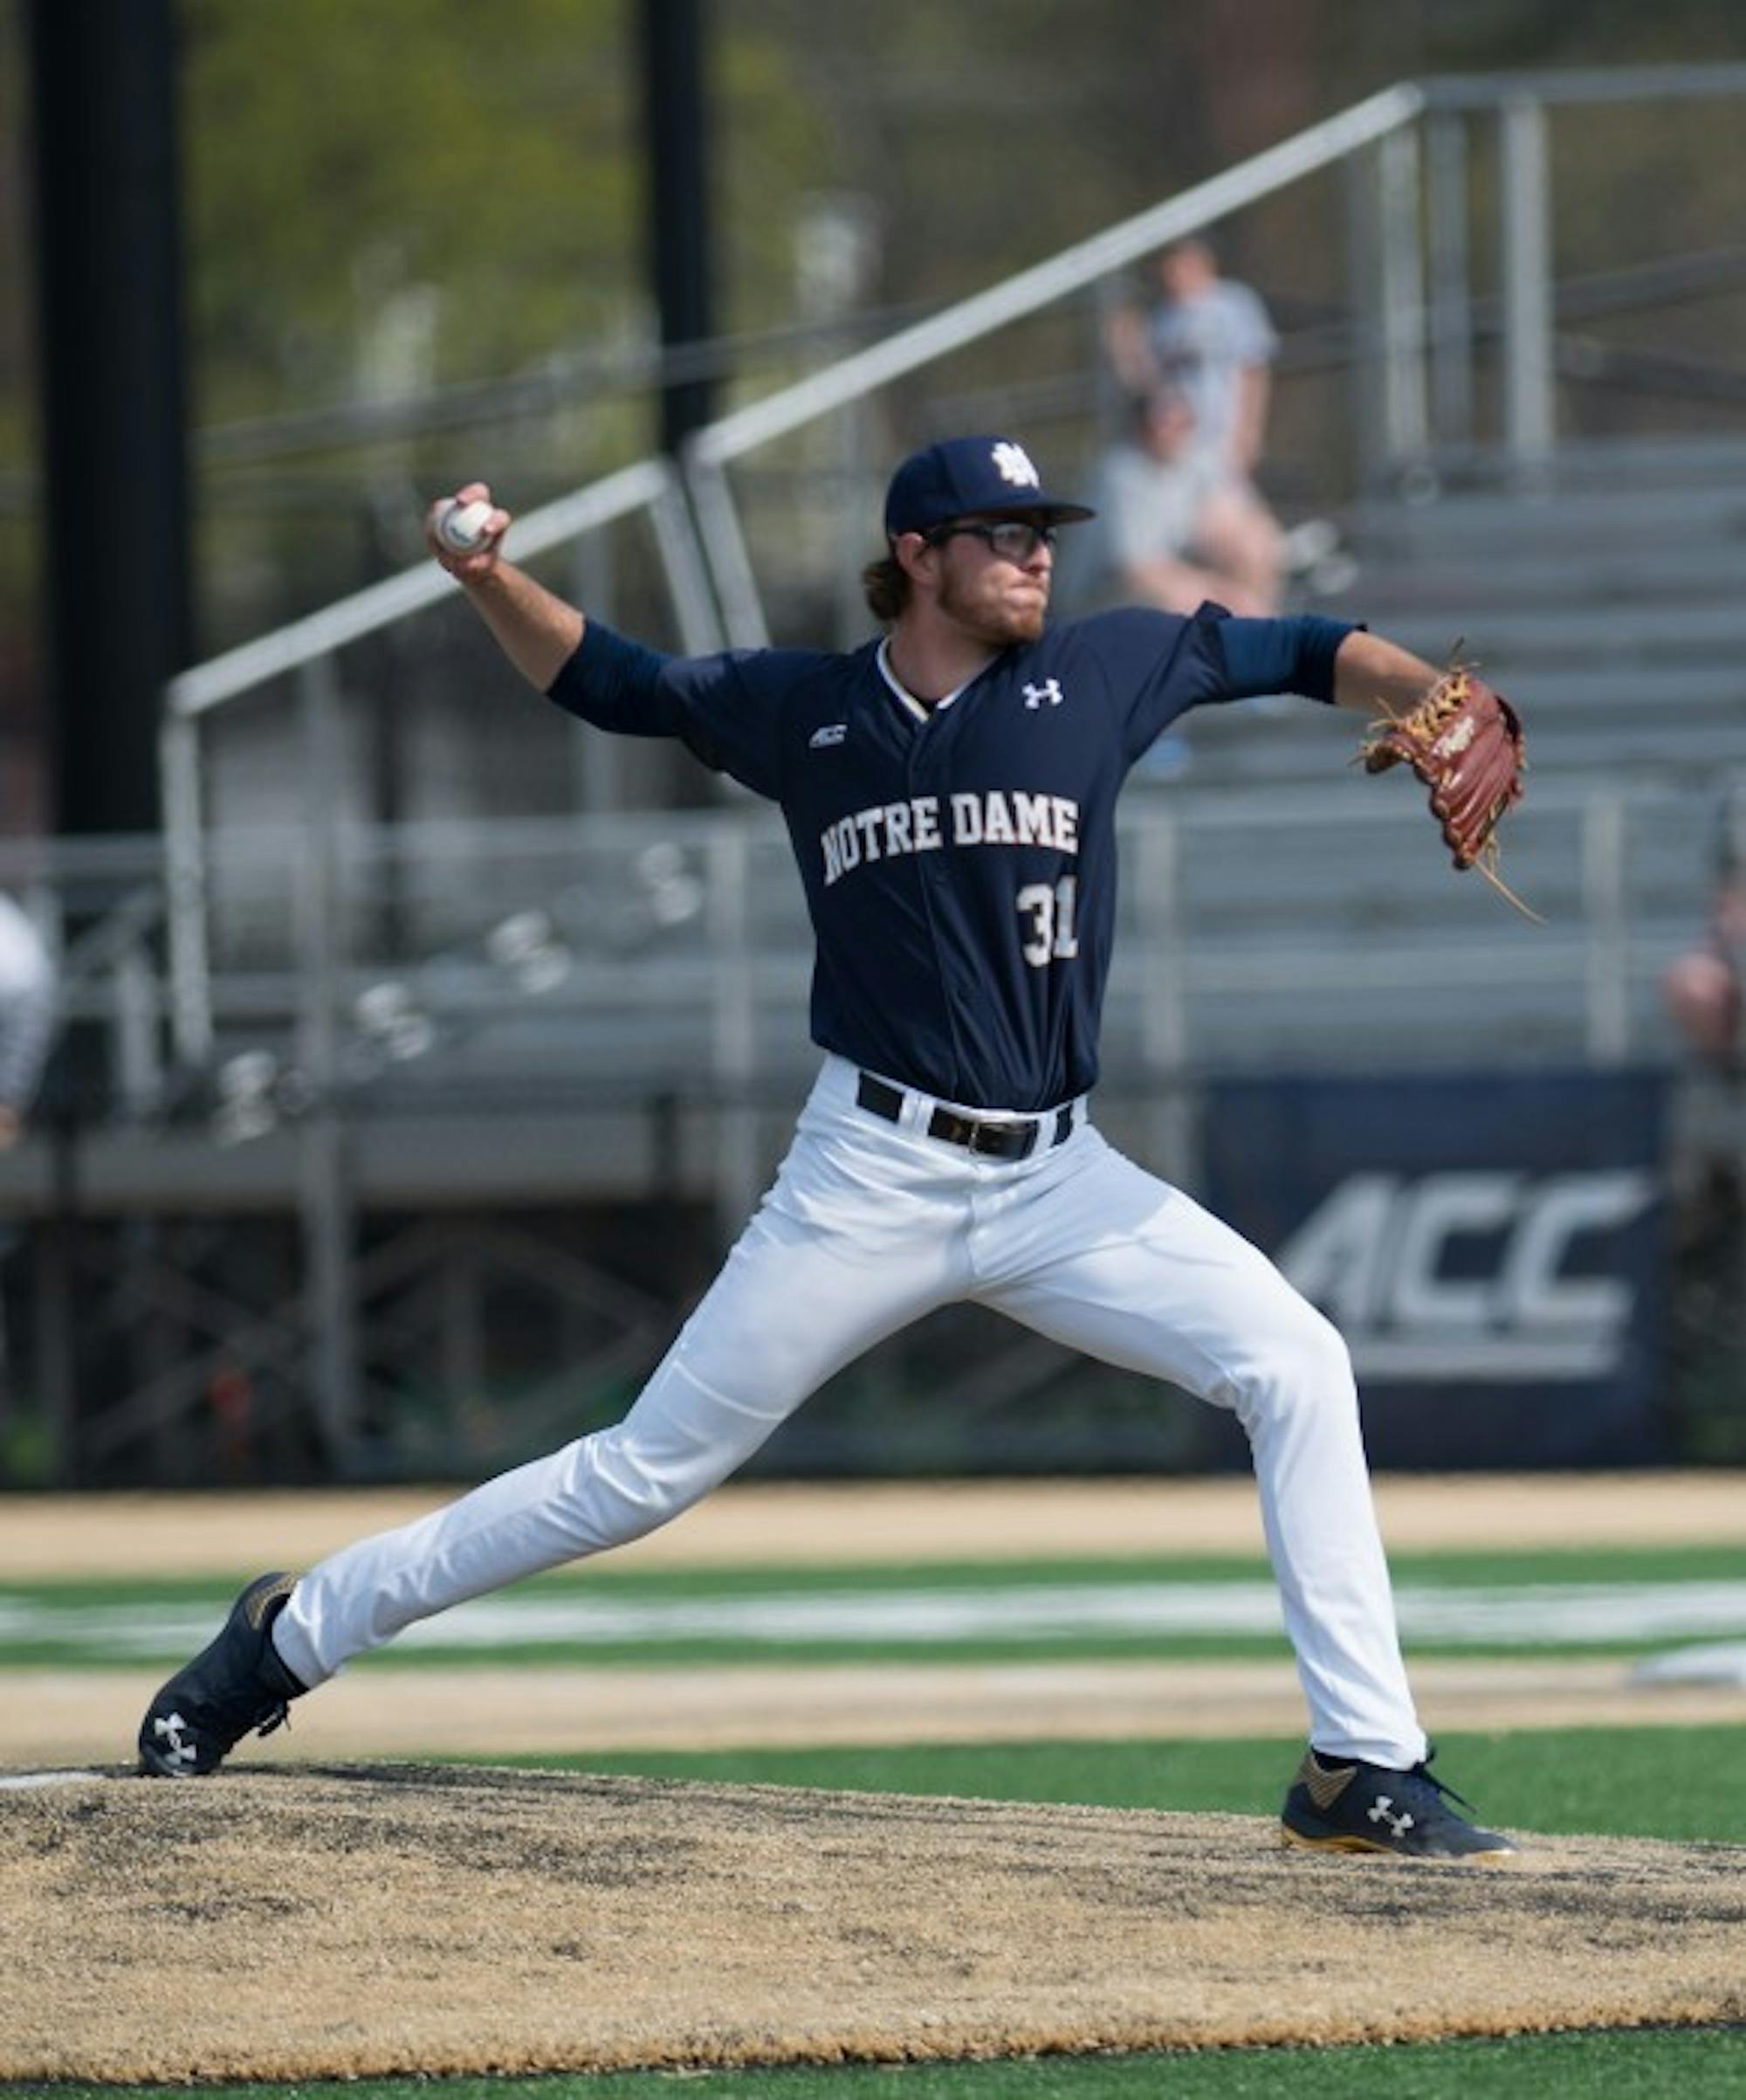 Senior right-hander Scott Kerrigan moves towards home during Notre Dame’s loss 4-2 to North Carolina State on Sunday.